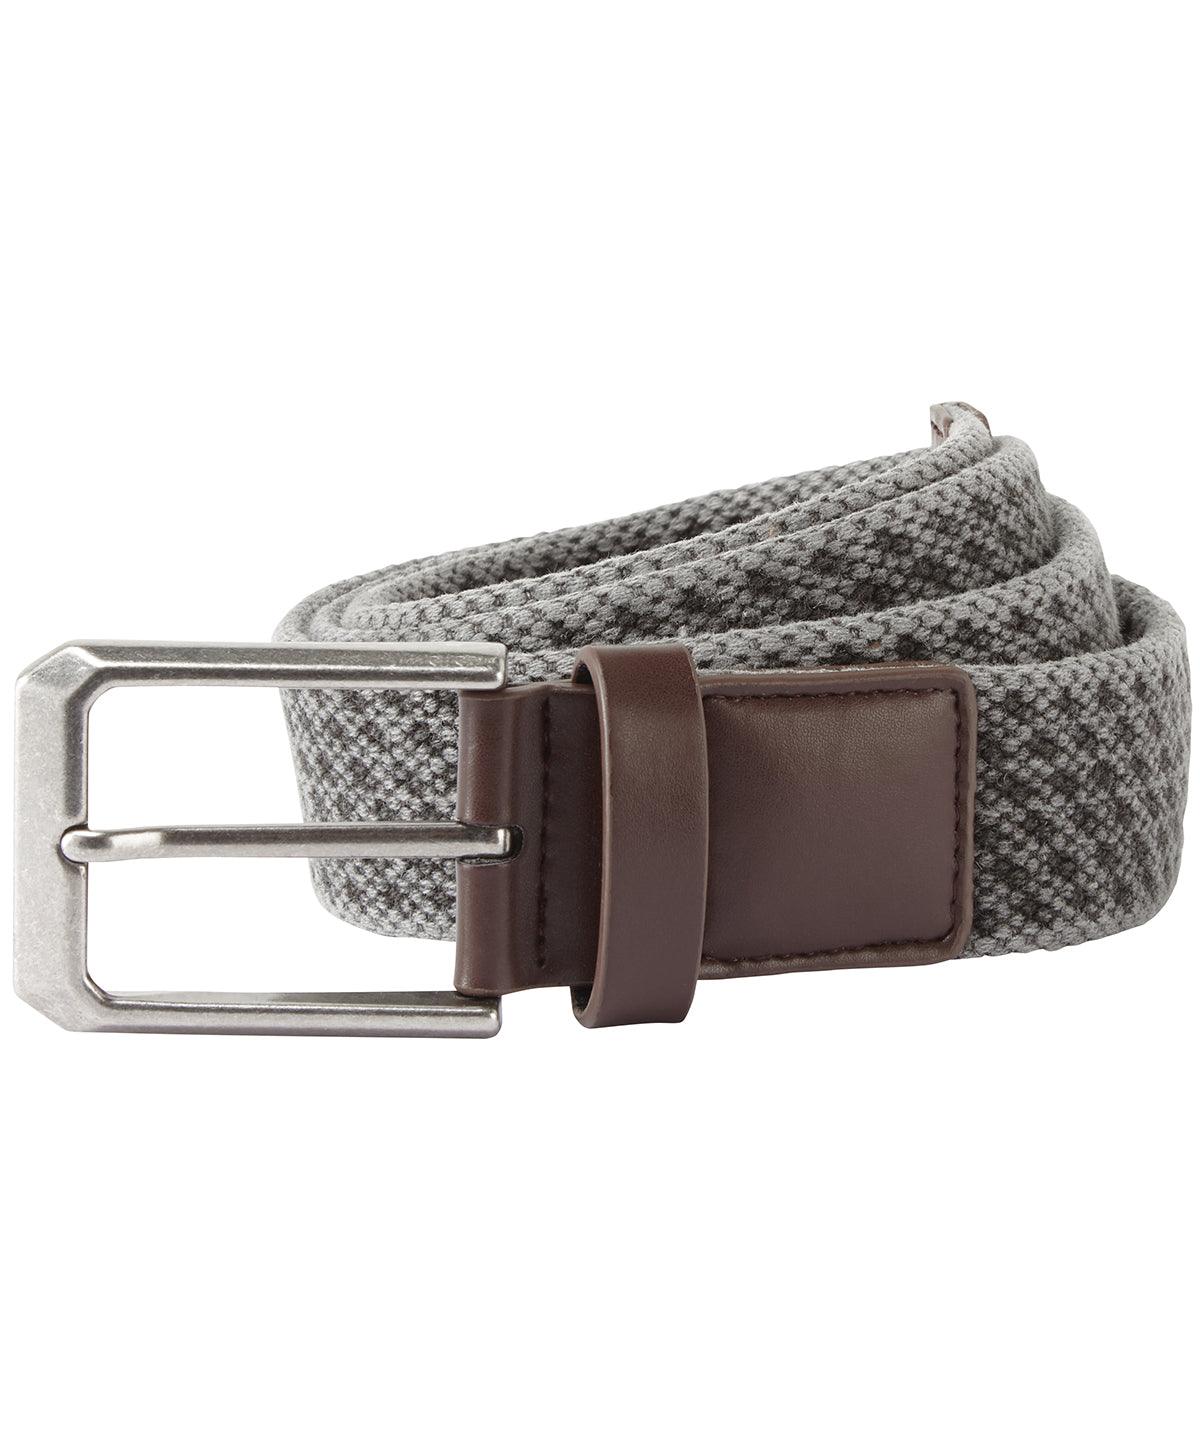 Slate - Men's vintage wash canvas belt Belts Asquith & Fox Gifting & Accessories, Rebrandable, Trousers & Shorts Schoolwear Centres